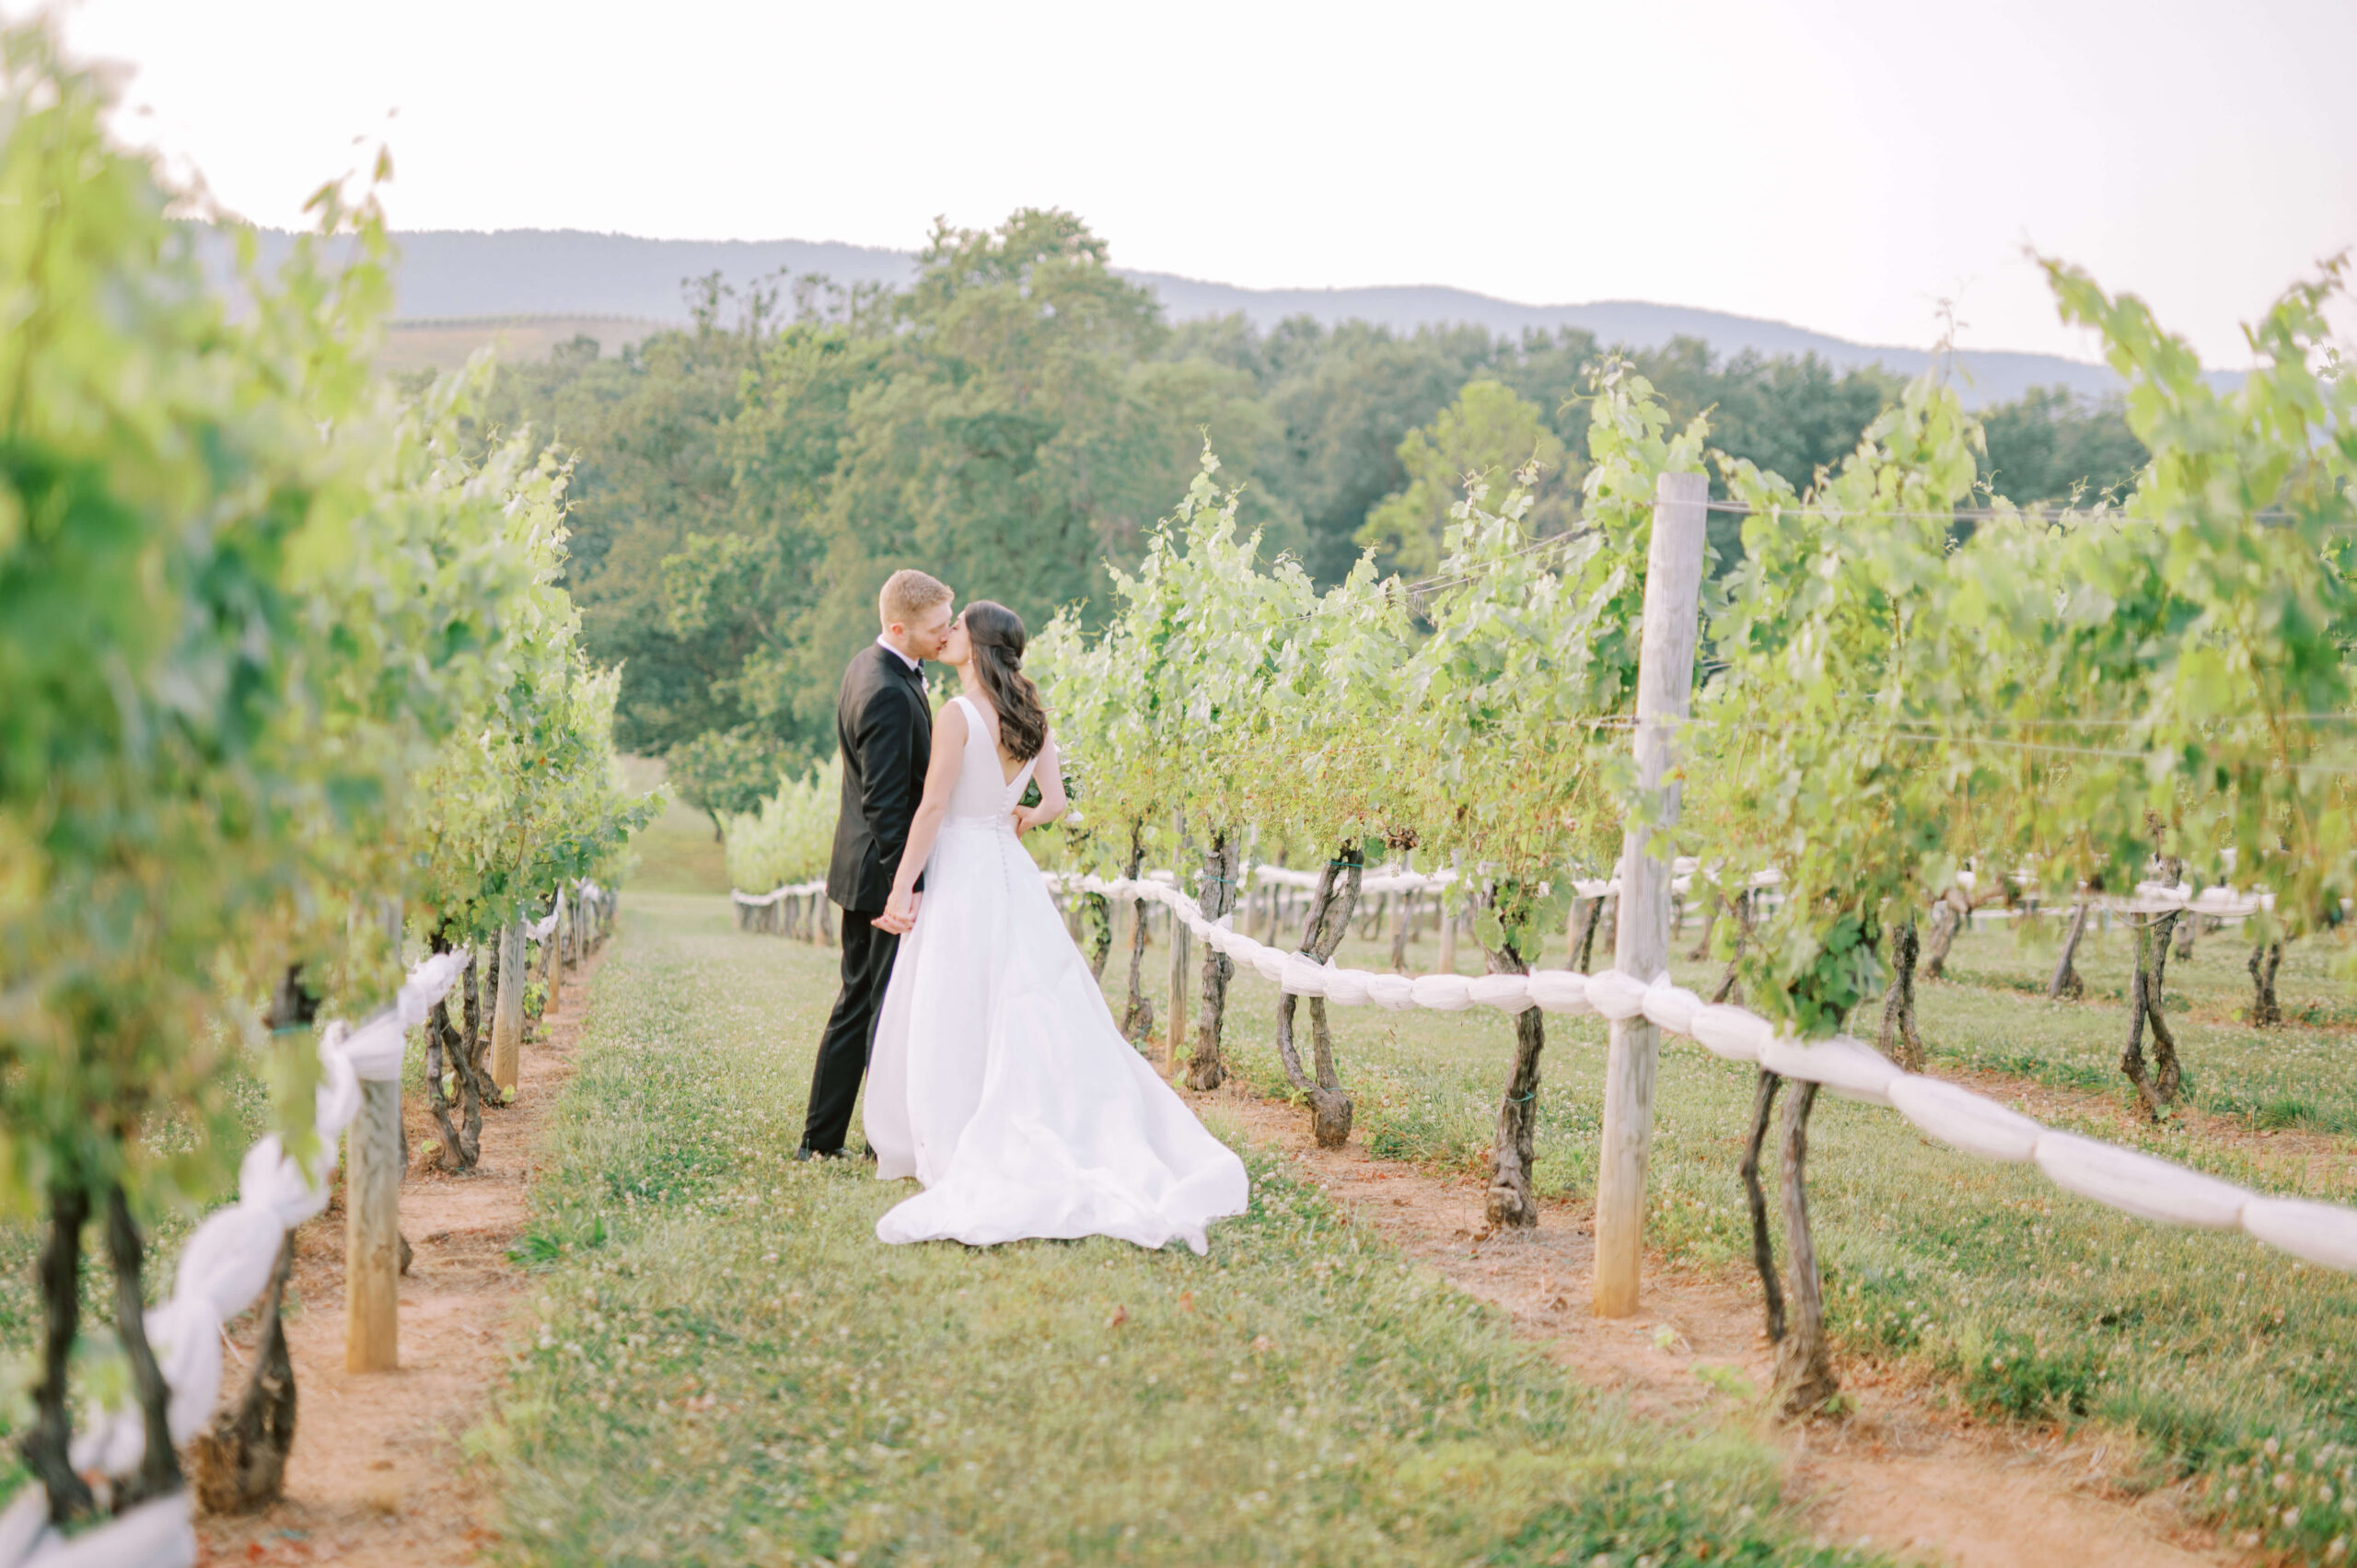 Couples kissing at Charlottesville wedding venue amidst vineyards